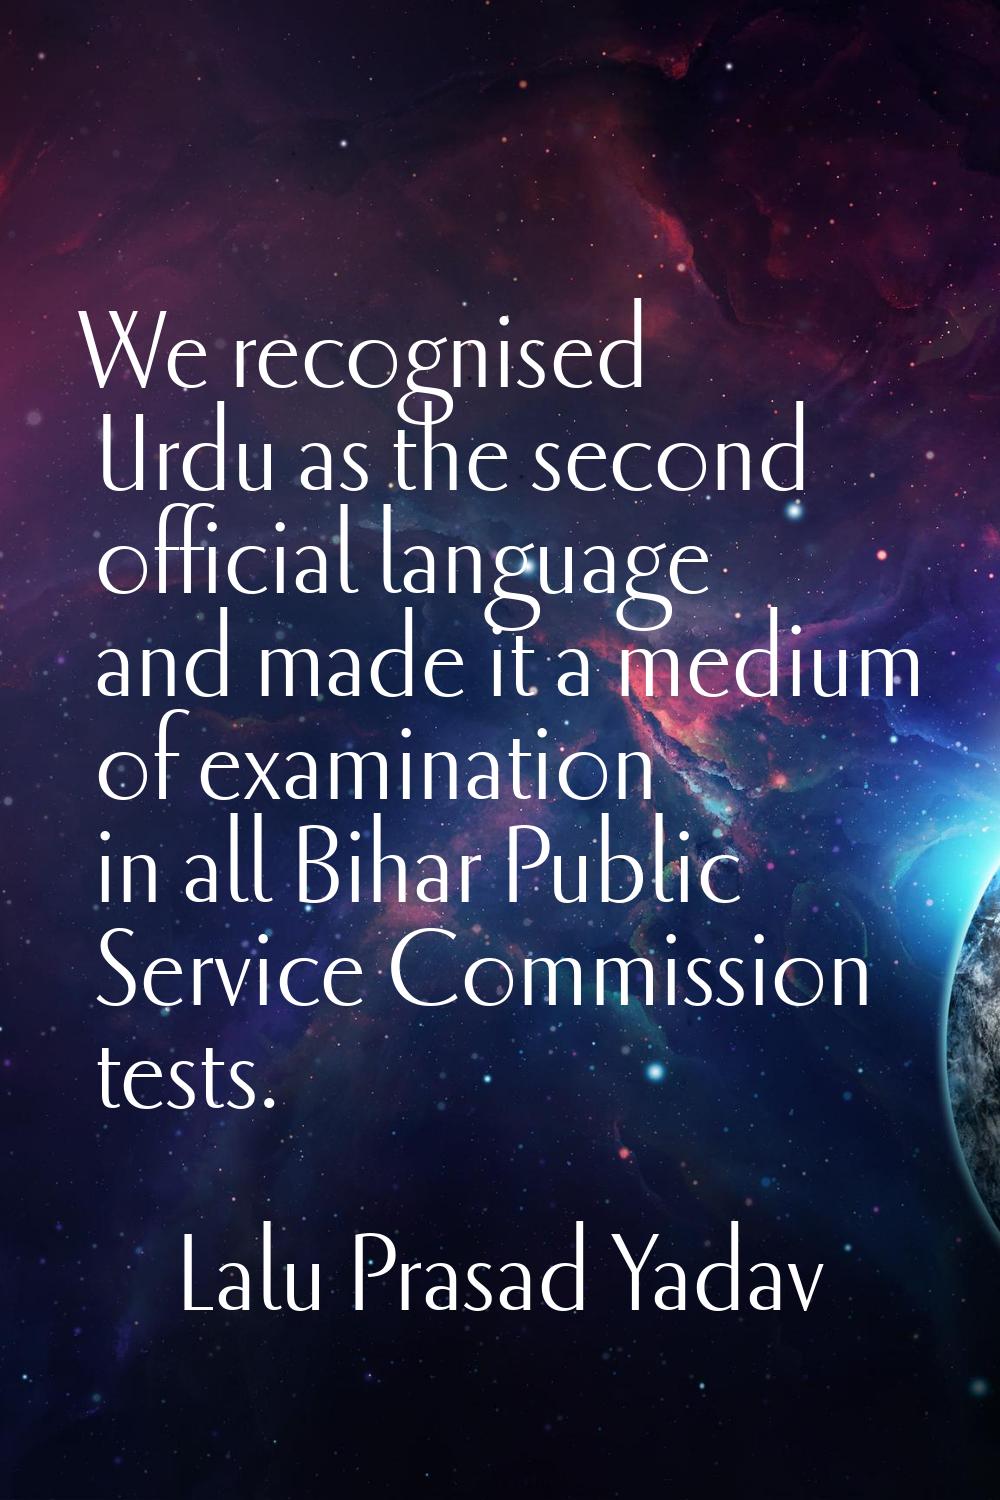 We recognised Urdu as the second official language and made it a medium of examination in all Bihar